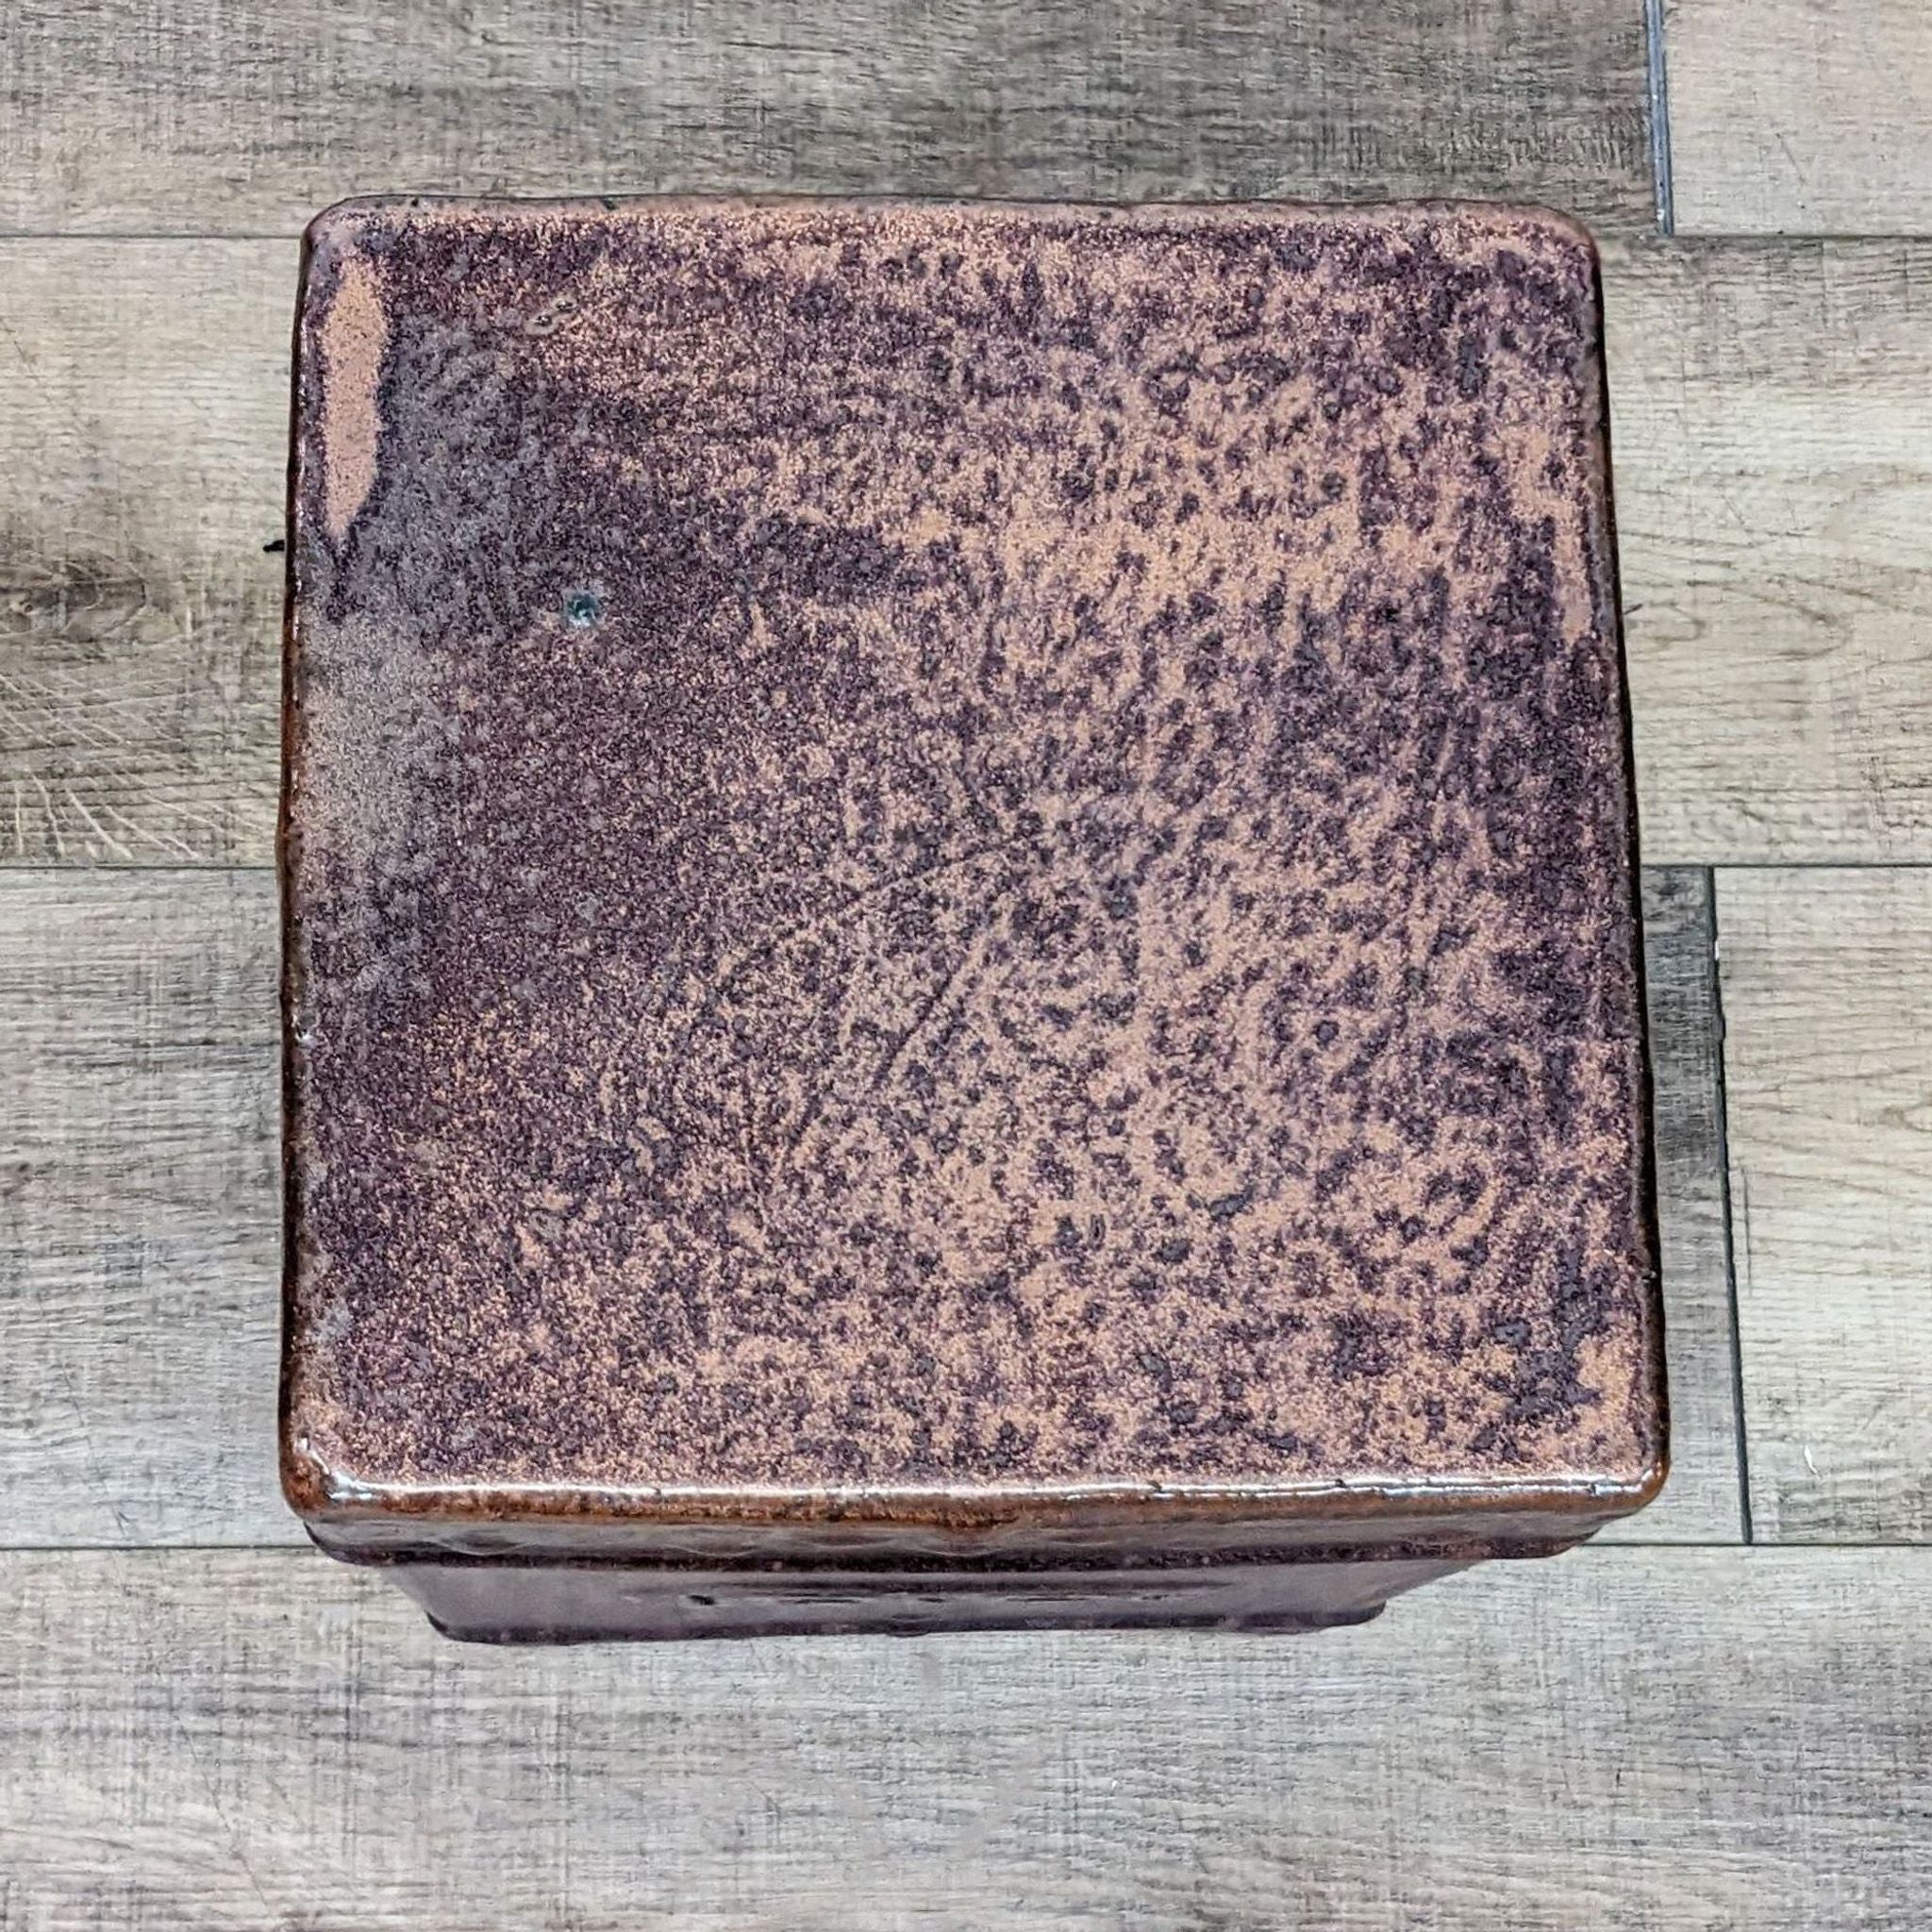 Top-down view of a square Reperch ceramic garden stool with a textured cinnabar glaze, on a wooden floor.